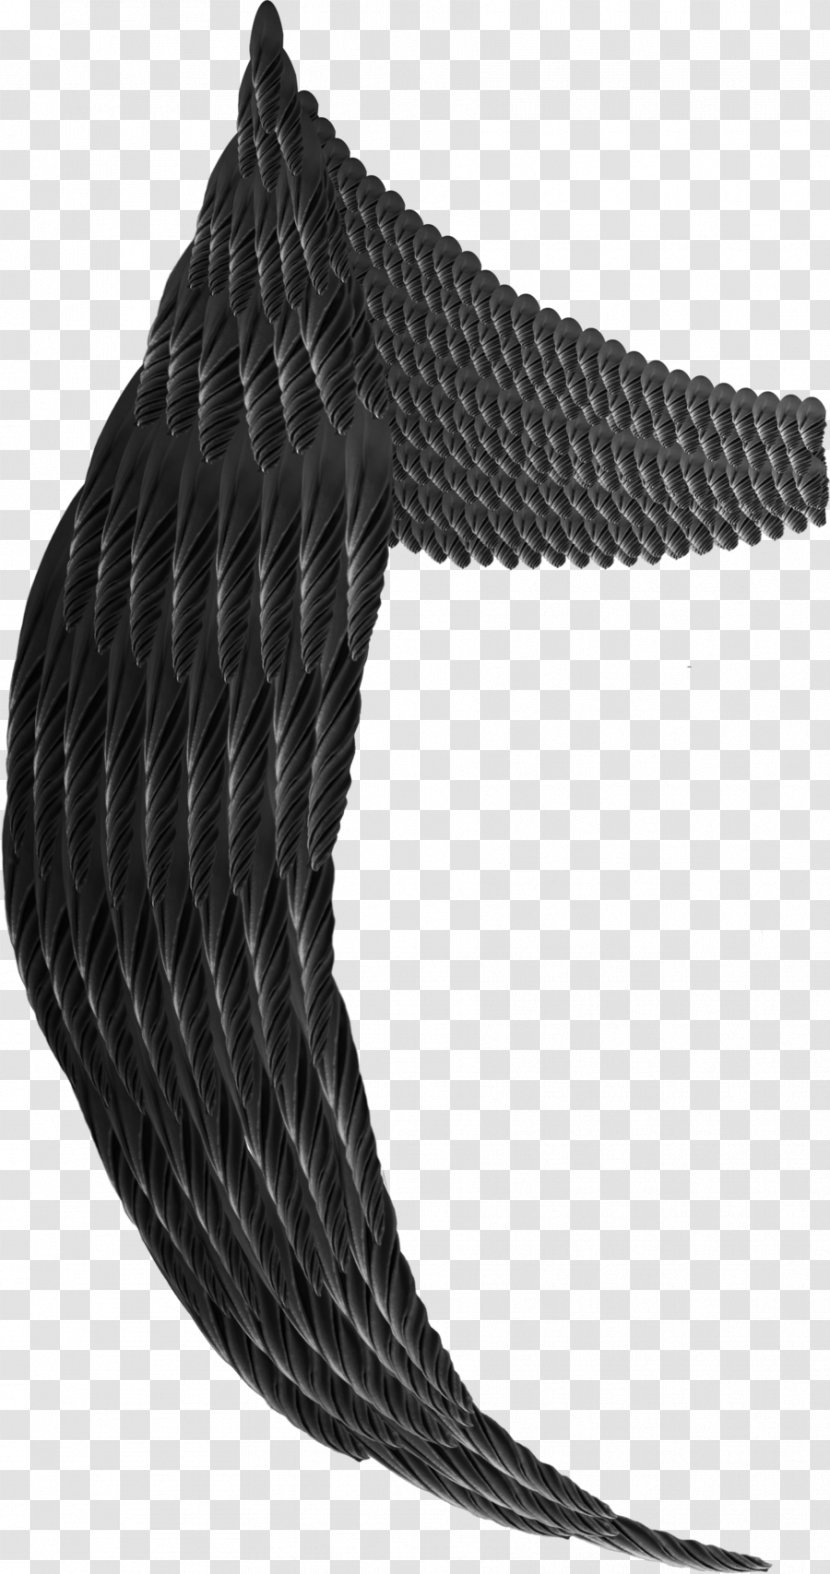 Rope Black - Hardware Accessory - Angel Wings Transparent PNG